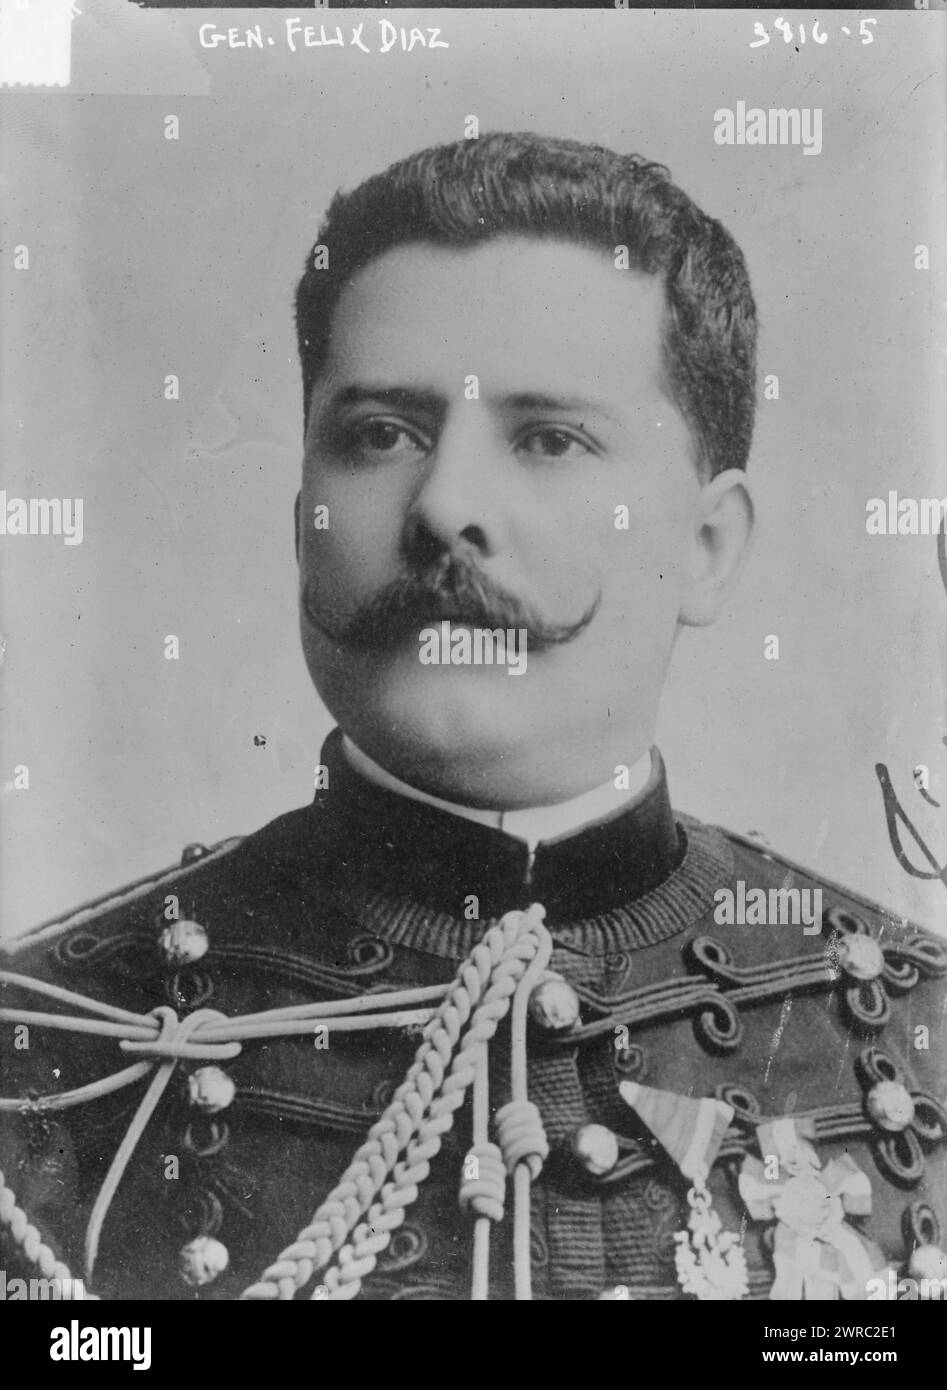 Gen. Felix Diaz, Photograph shows Félix Díaz Velasco (1868-1945), a Mexican politician and general who was leading figure in the rebellion against President Francisco I. Madero during the Mexican Revolution., between ca. 1915 and ca. 1920, Glass negatives, 1 negative: glass Stock Photo